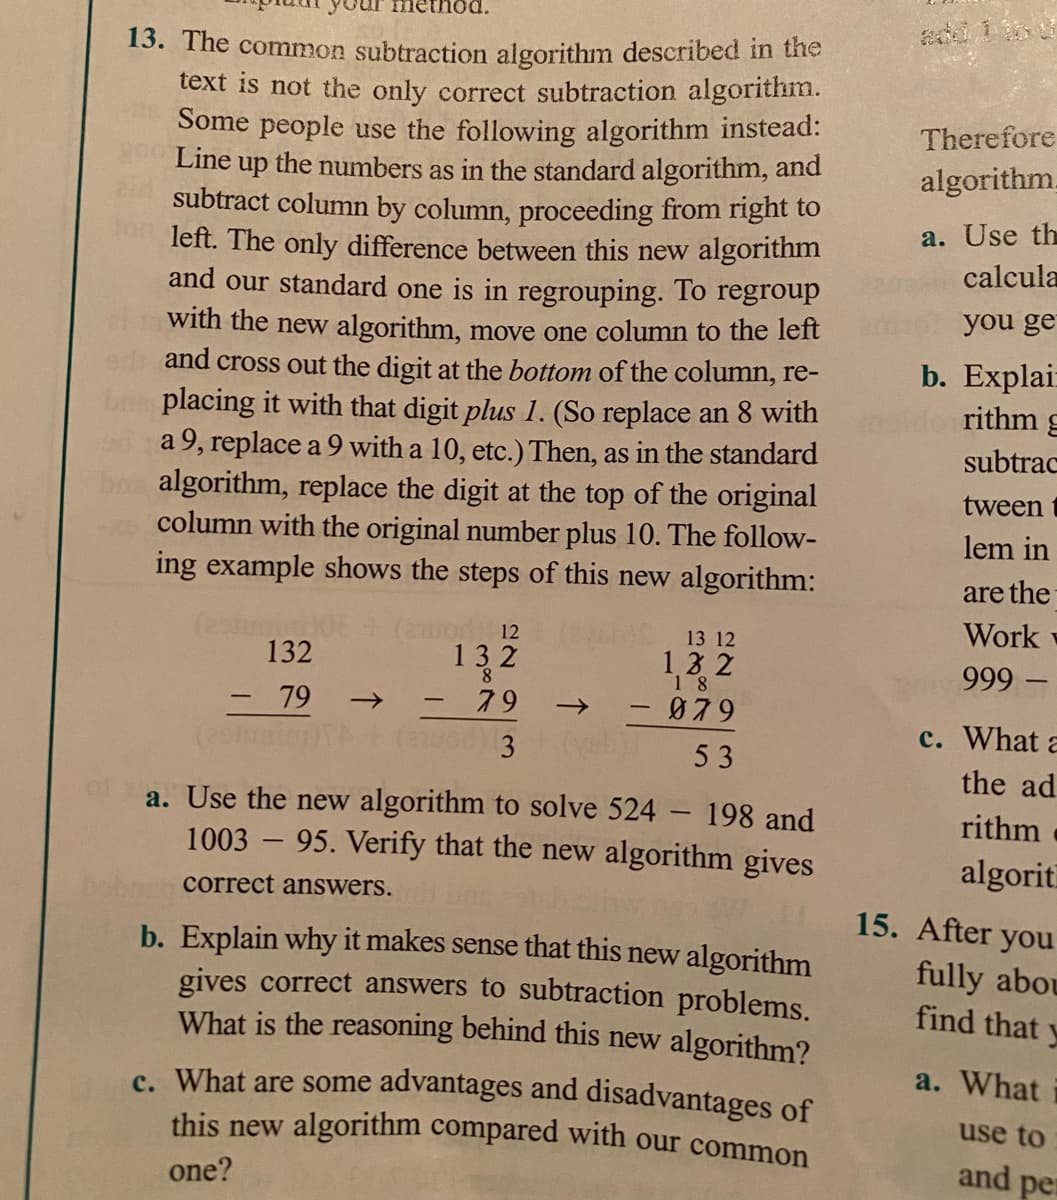 13. The common subtraction algorithm described in the
text is not the only correct subtraction algorithm.
Some people use the following algorithm instead:
Line
Therefore
the numbers as in the standard algorithm, and
algorithm.
up
subtract column by column, proceeding from right to
on left. The only difference between this new algorithm
and our standard one is in regrouping. To regroup
a. Use th
calcula
you ge
with the new algorithm, move one column to the left
and cross out the digit at the bottom of the column, re-
placing it with that digit plus 1. (So replace an 8 with
da 9, replace a 9 with a 10, etc.) Then, as in the standard
algorithm, replace the digit at the top of the original
column with the original number plus 10. The follow-
ing example shows the steps of this new algorithm:
b. Explai:
rithm g
subtrac
tween
lem in
are the
Work
o12
132
13 12
132
13 2
18
999
79
- 79
079
->
-
c. What a
3
53
the ad
a. Use the new algorithm to solve 524 198 and
1003 – 95. Verify that the new algorithm gives
rithm
algorit
correct answers.
15. After you
b. Explain why it makes sense that this new algorithm
gives correct answers to subtraction problems.
What is the reasoning behind this new algorithm?
fully abou
find that y
a. What
c. What are some advantages and disadvantages of
this new algorithm compared with our common
use to
and per
one?
